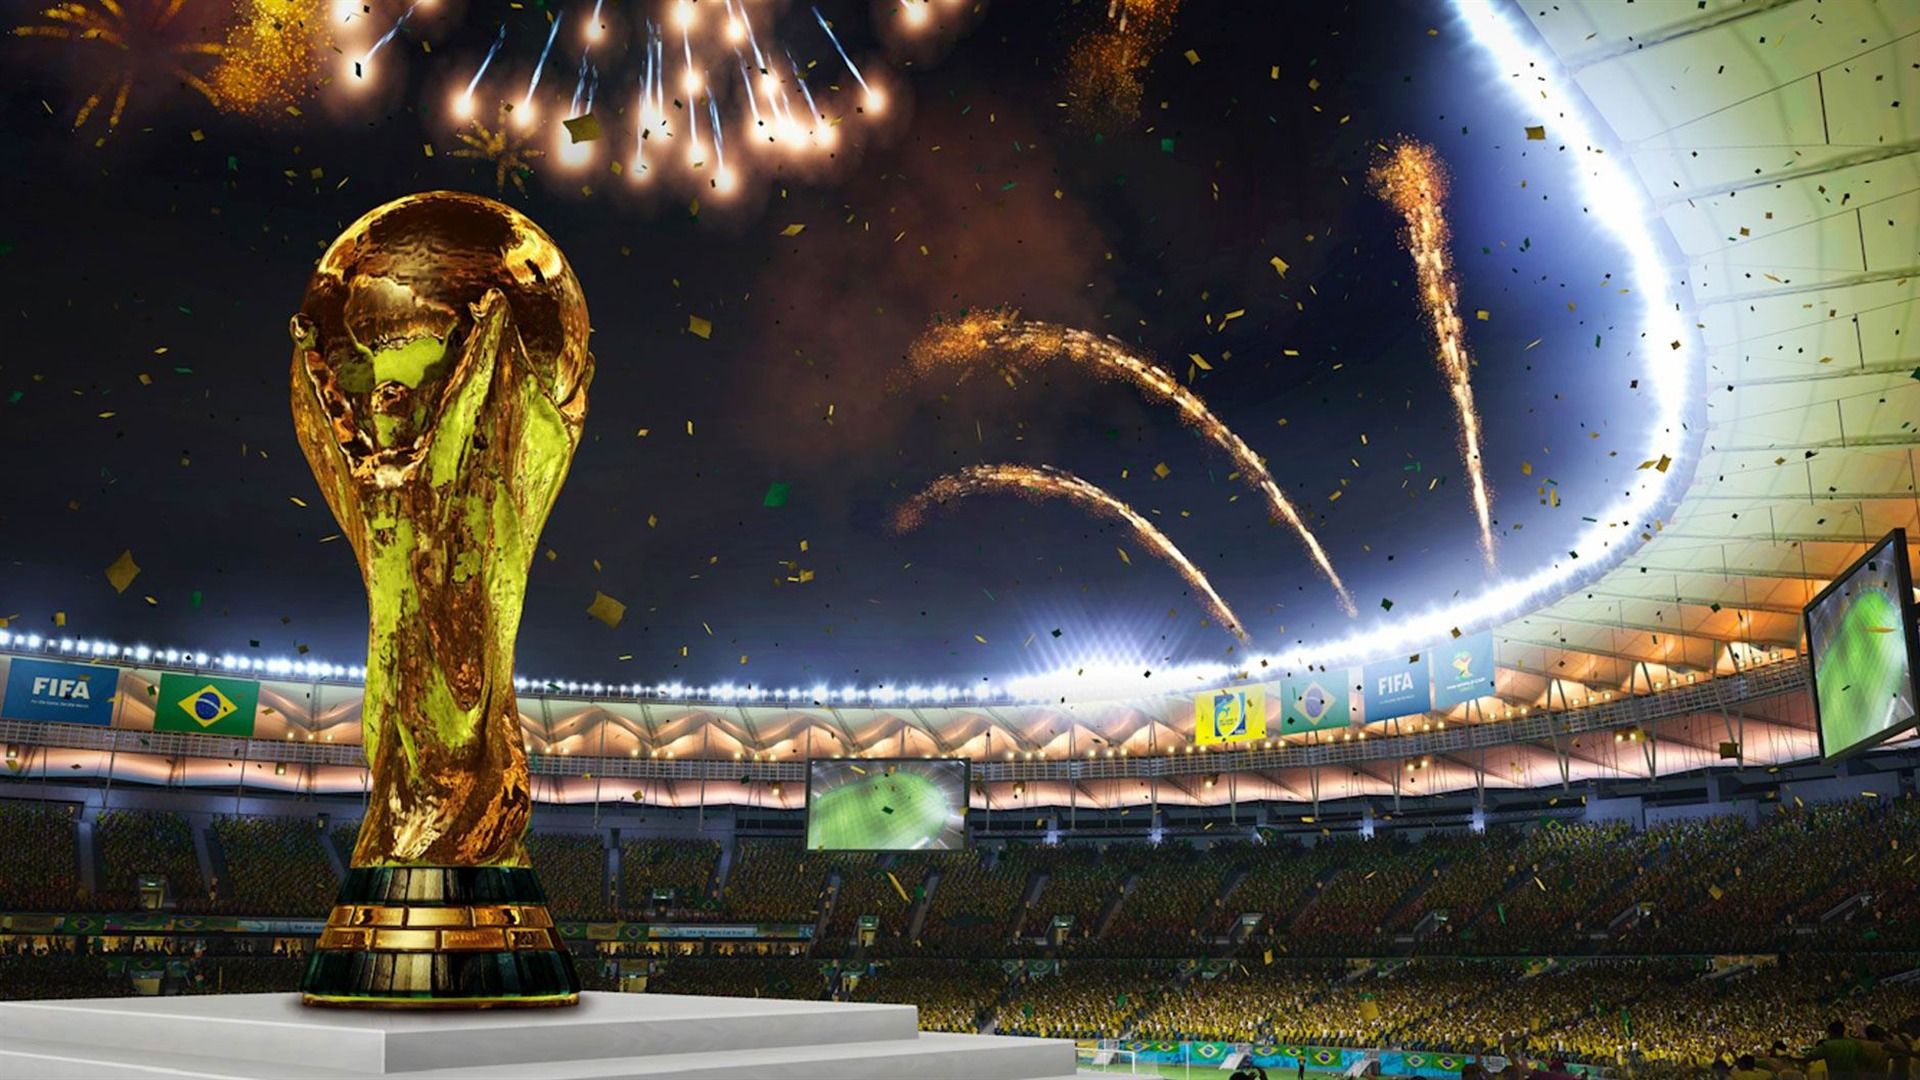 Wallpapers Fifa 2018 cup fireworks on the desktop